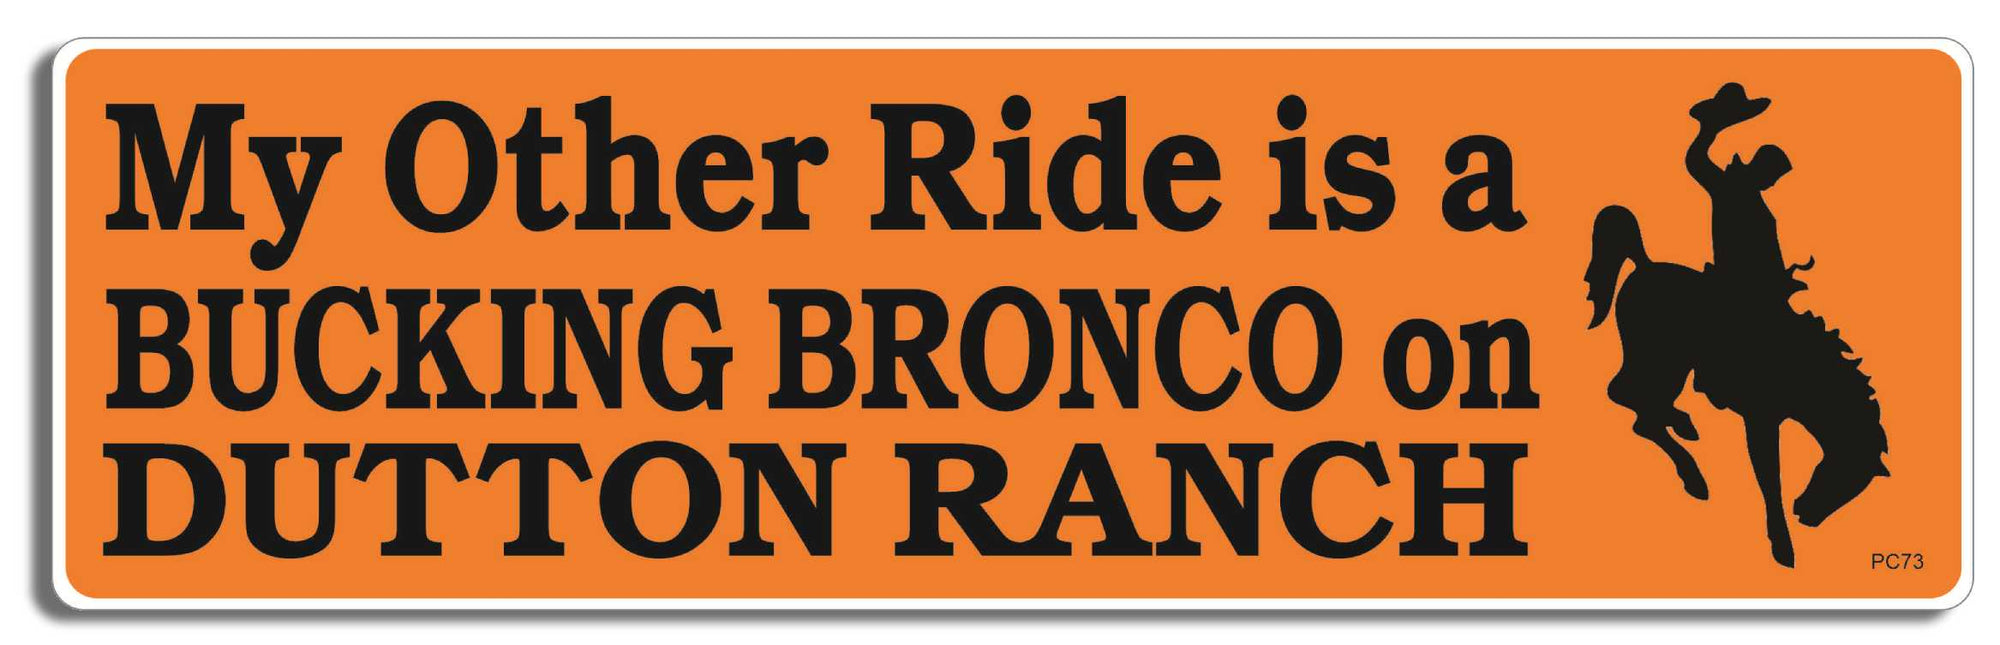 My Other Ride is a Bucking Bronco on Dutton Ranch -  3" x 10" Bumper Sticker--Car Magnet- -  Decal Bumper Sticker-yellowstones Bumper Sticker Car Magnet My Other Ride is a Bucking Bronco tombstone-  Decal for cars funny bumper sticker, funny quote, funny quotes